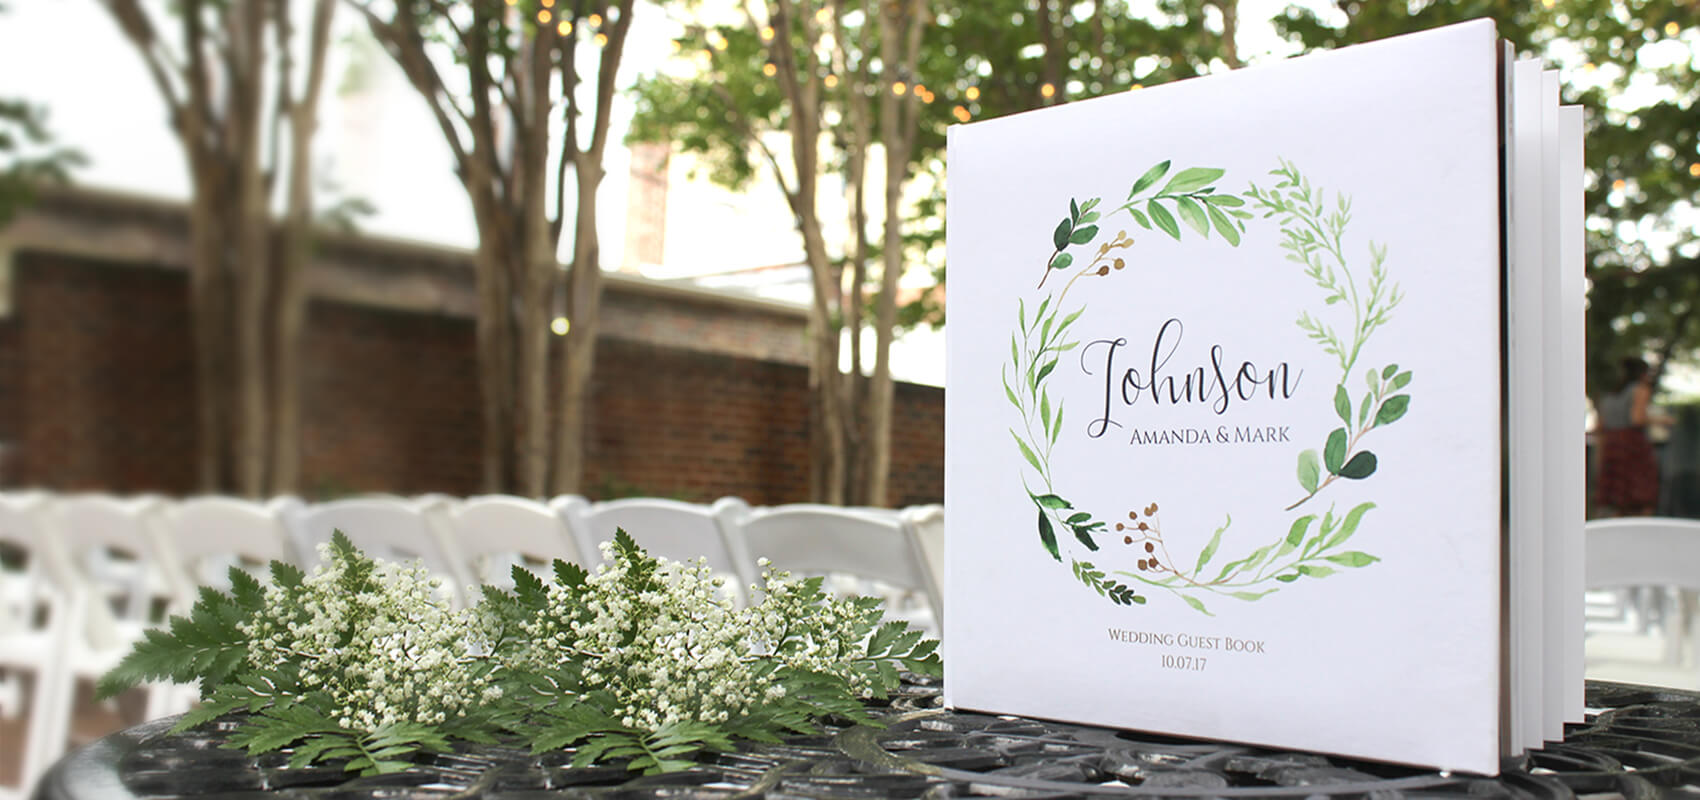 Wedding guest book featuring engagement photos.